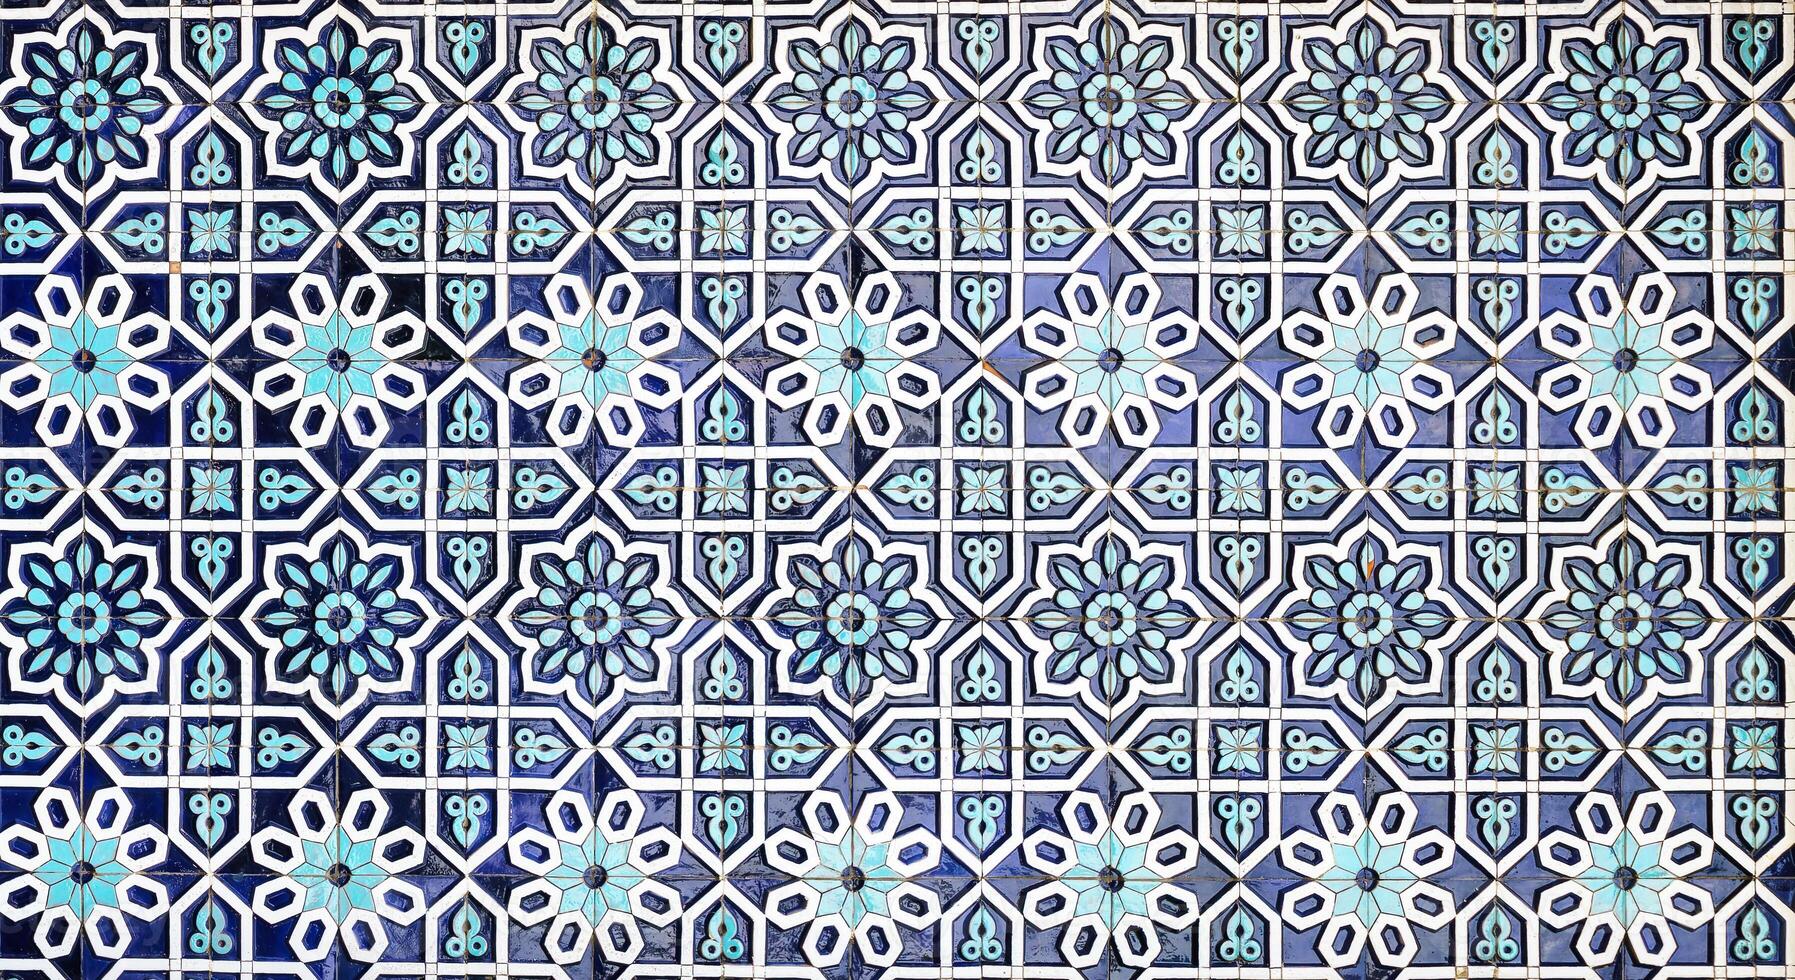 Geometric traditional Islamic ornament. Fragment of a ceramic mosaic. Abstract background. photo